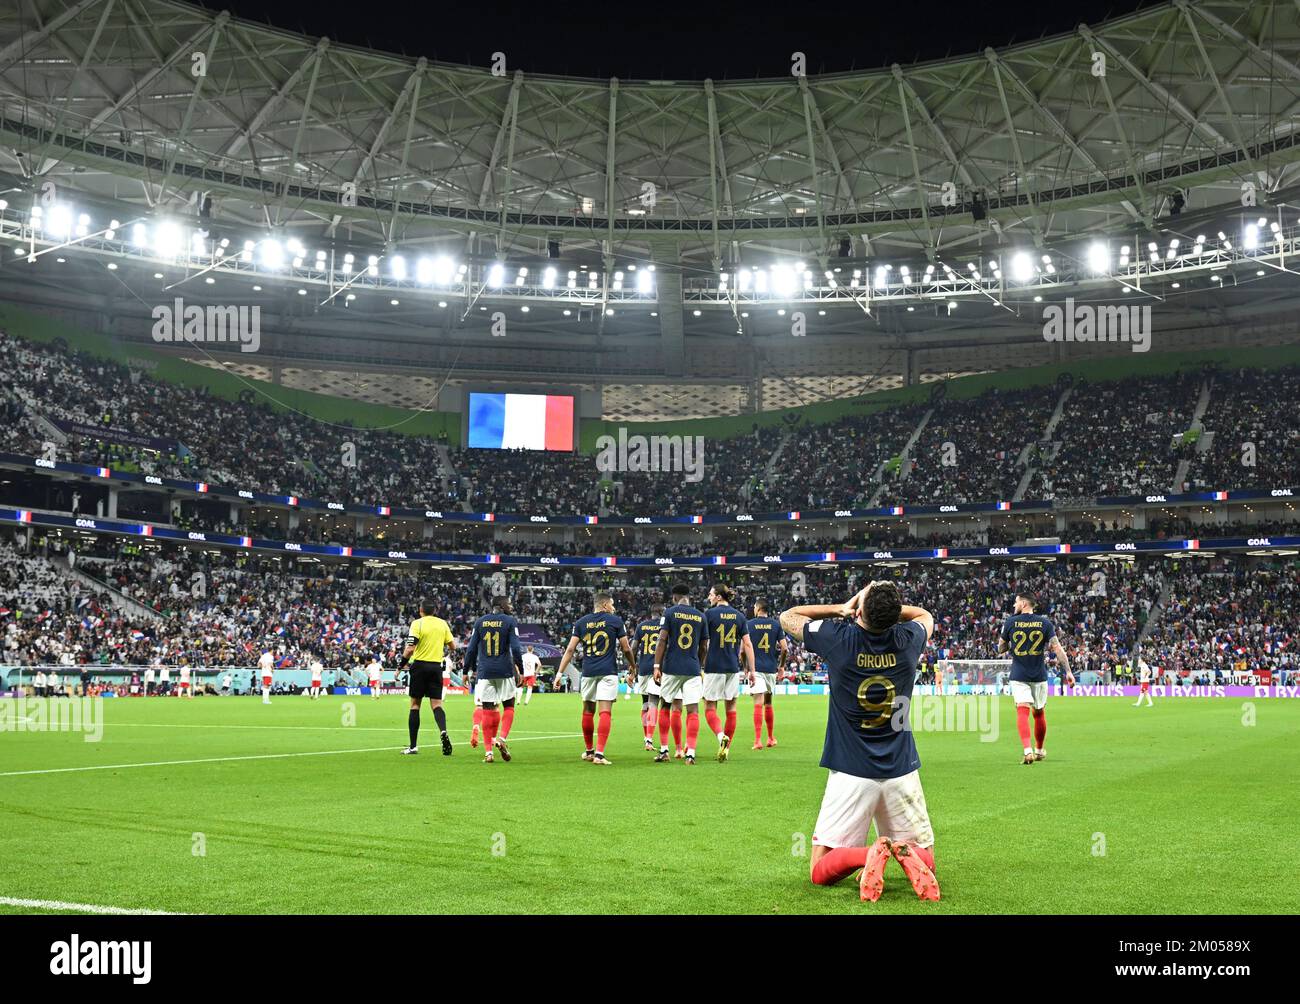 Doha, Qatar. 4th Dec, 2022. Olivier Giroud (front) of France celebrates his goal during the Round of 16 match between France and Poland of the 2022 FIFA World Cup at Al Thumama Stadium in Doha, Qatar, Dec. 4, 2022. Credit: Xiao Yijiu/Xinhua/Alamy Live News Stock Photo